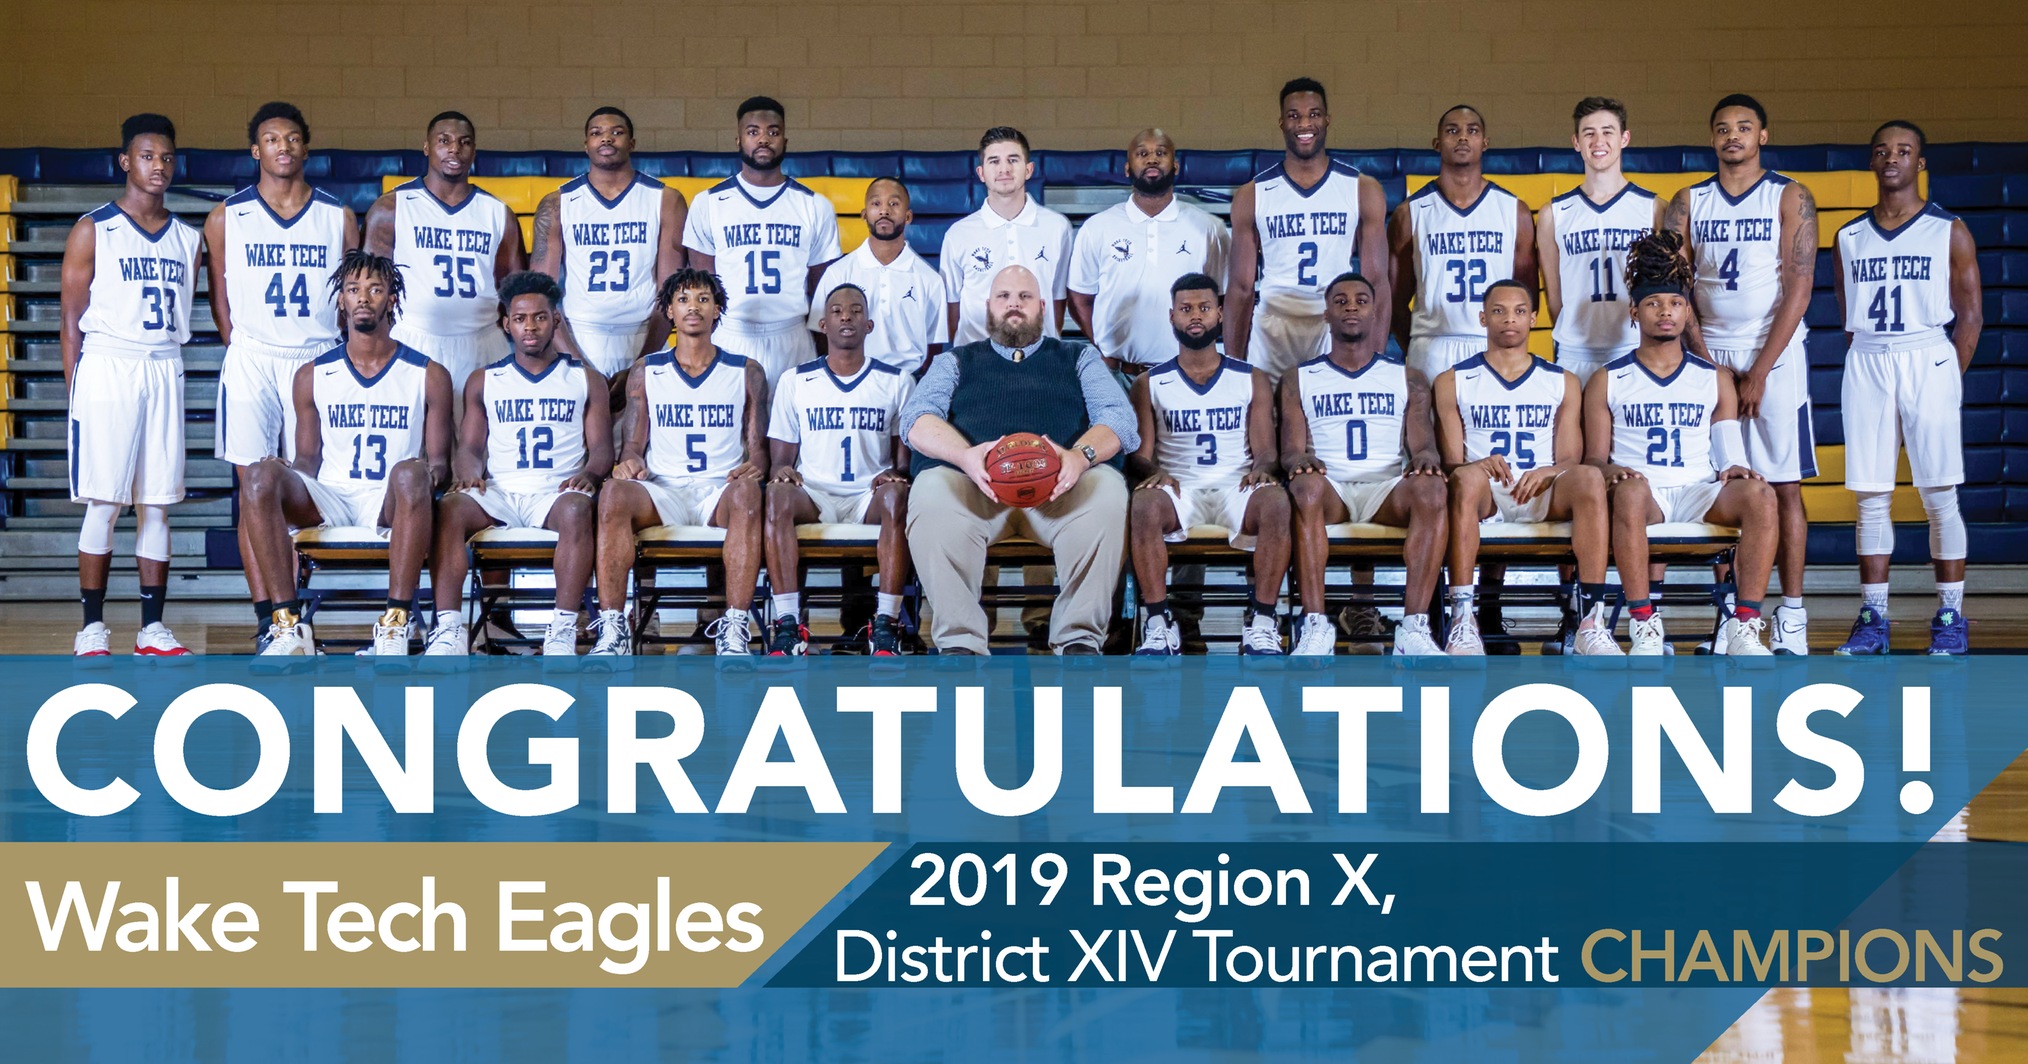 Wake Tech advanced to the NJCAA, DII National Tournament after a blistering run through the Region X, District XIV Tournament.